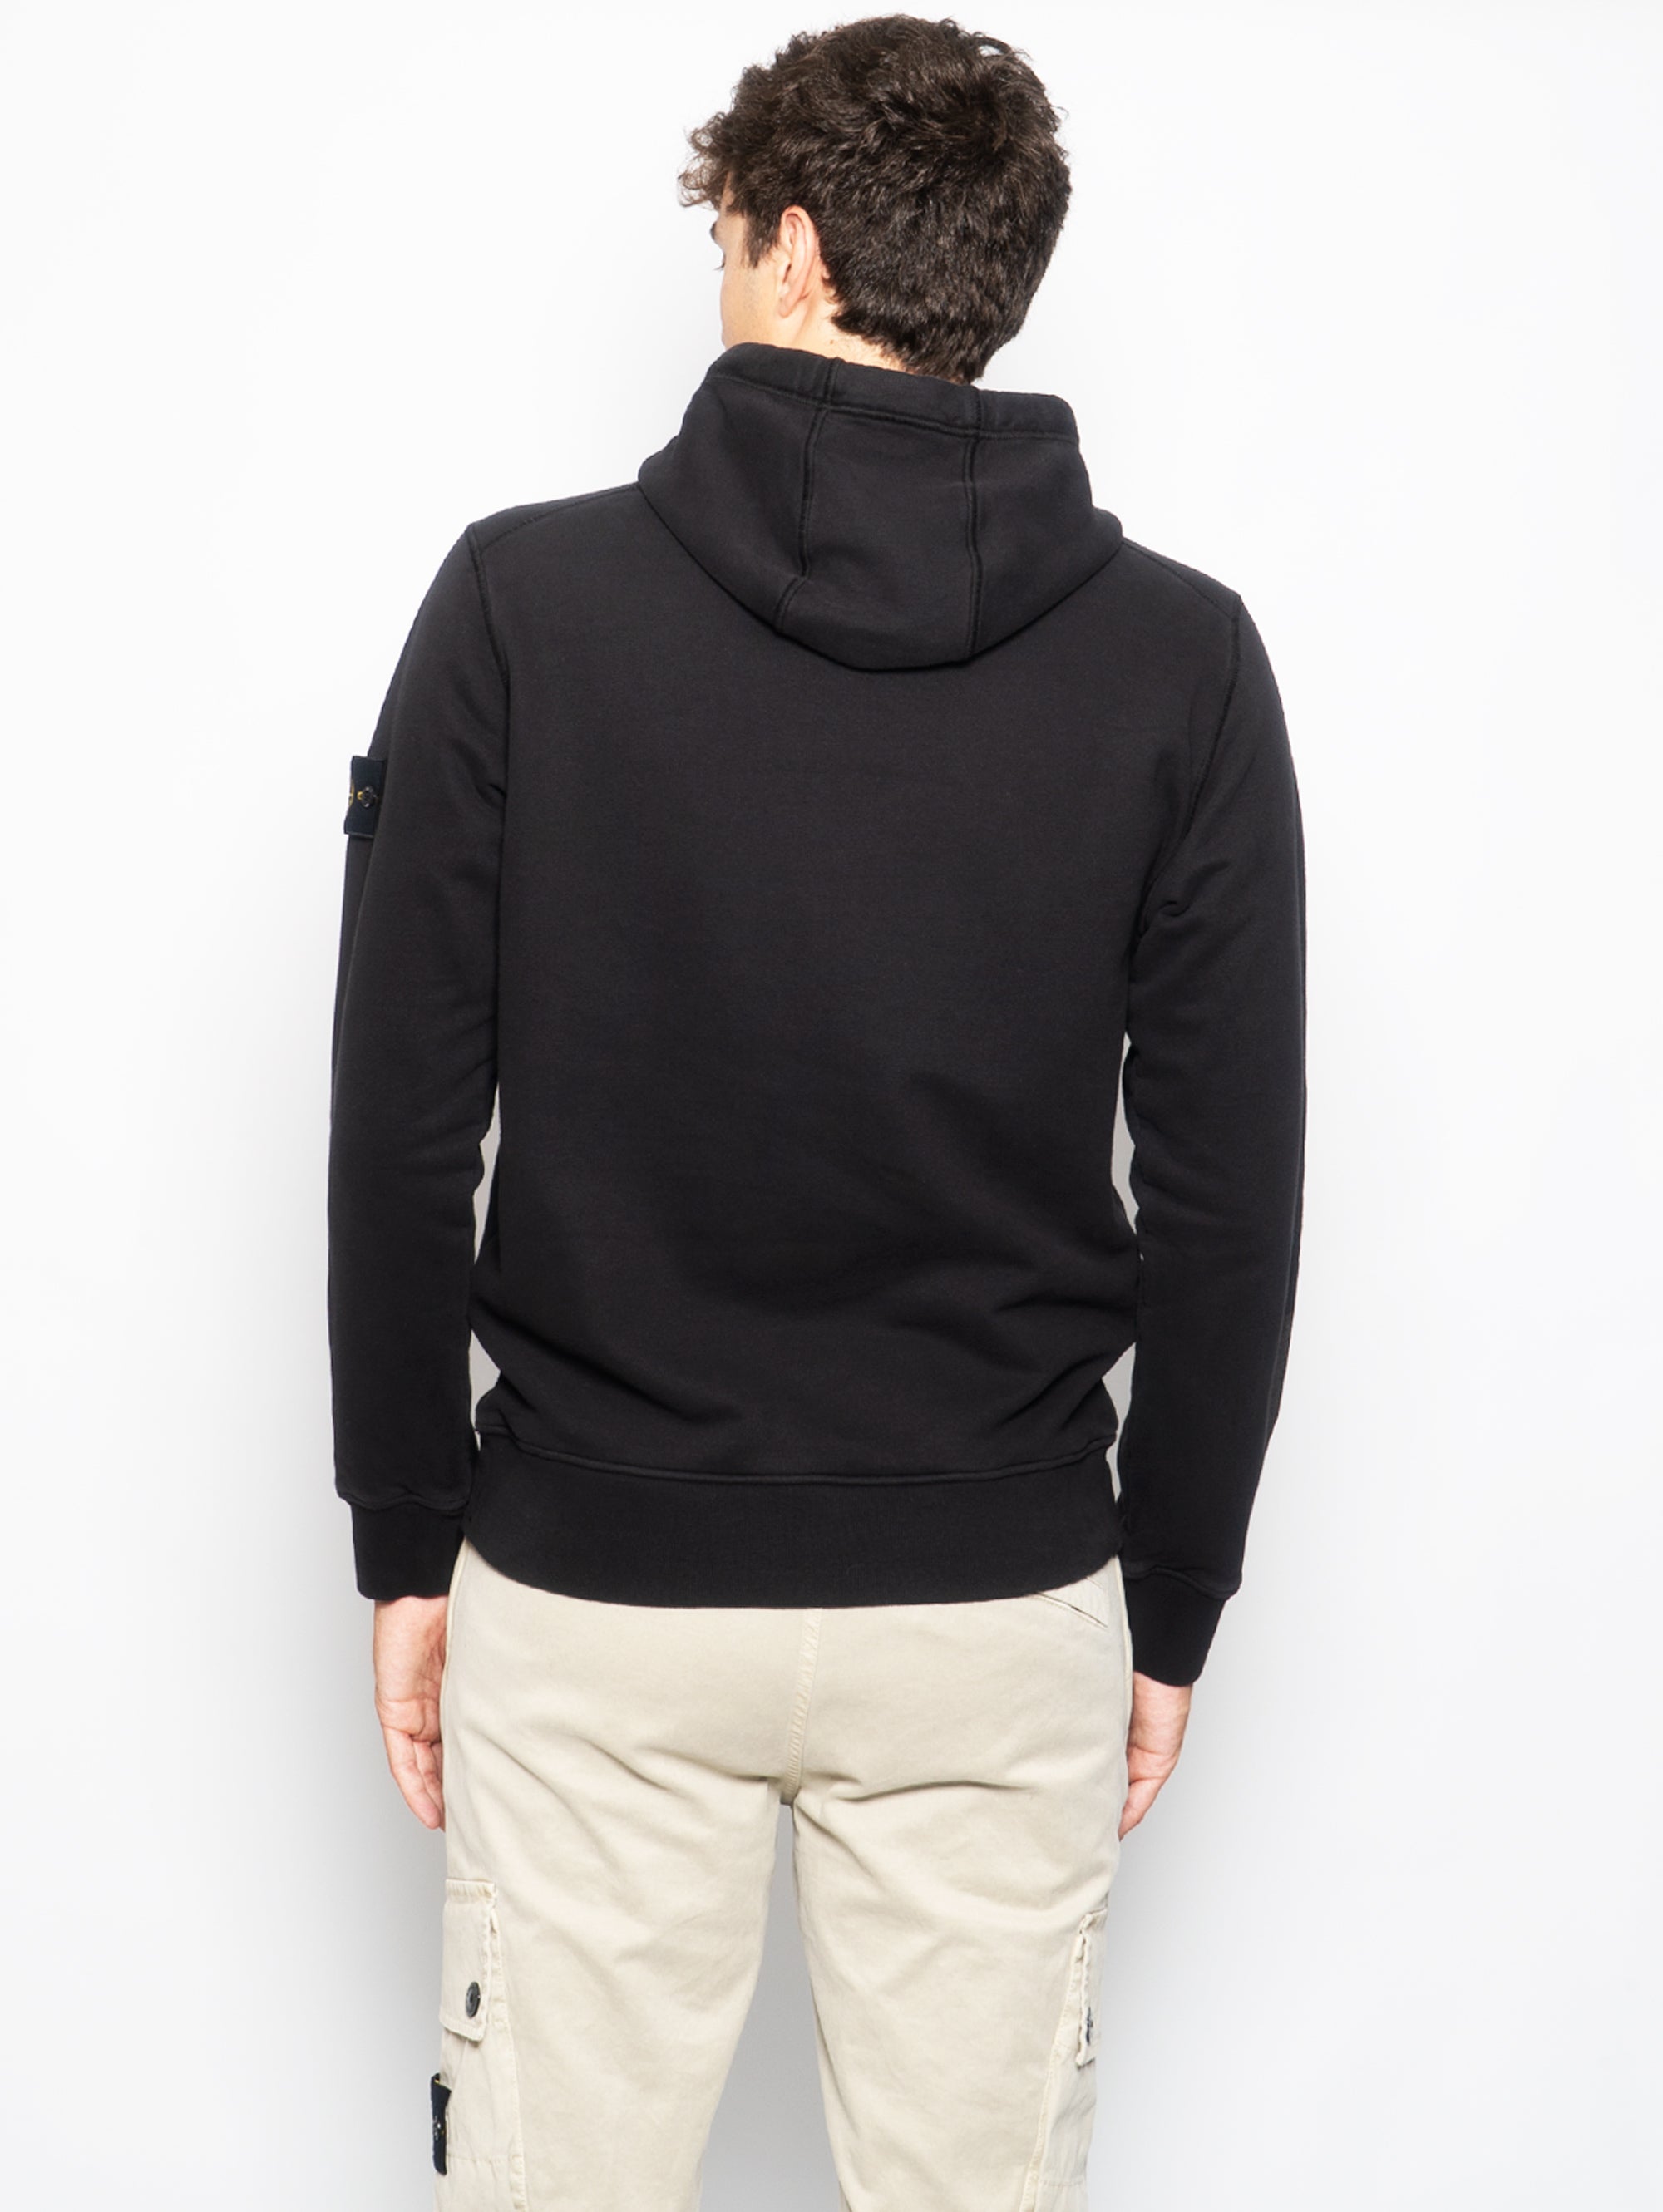 Black Hooded Sweatshirt with Reflective Details